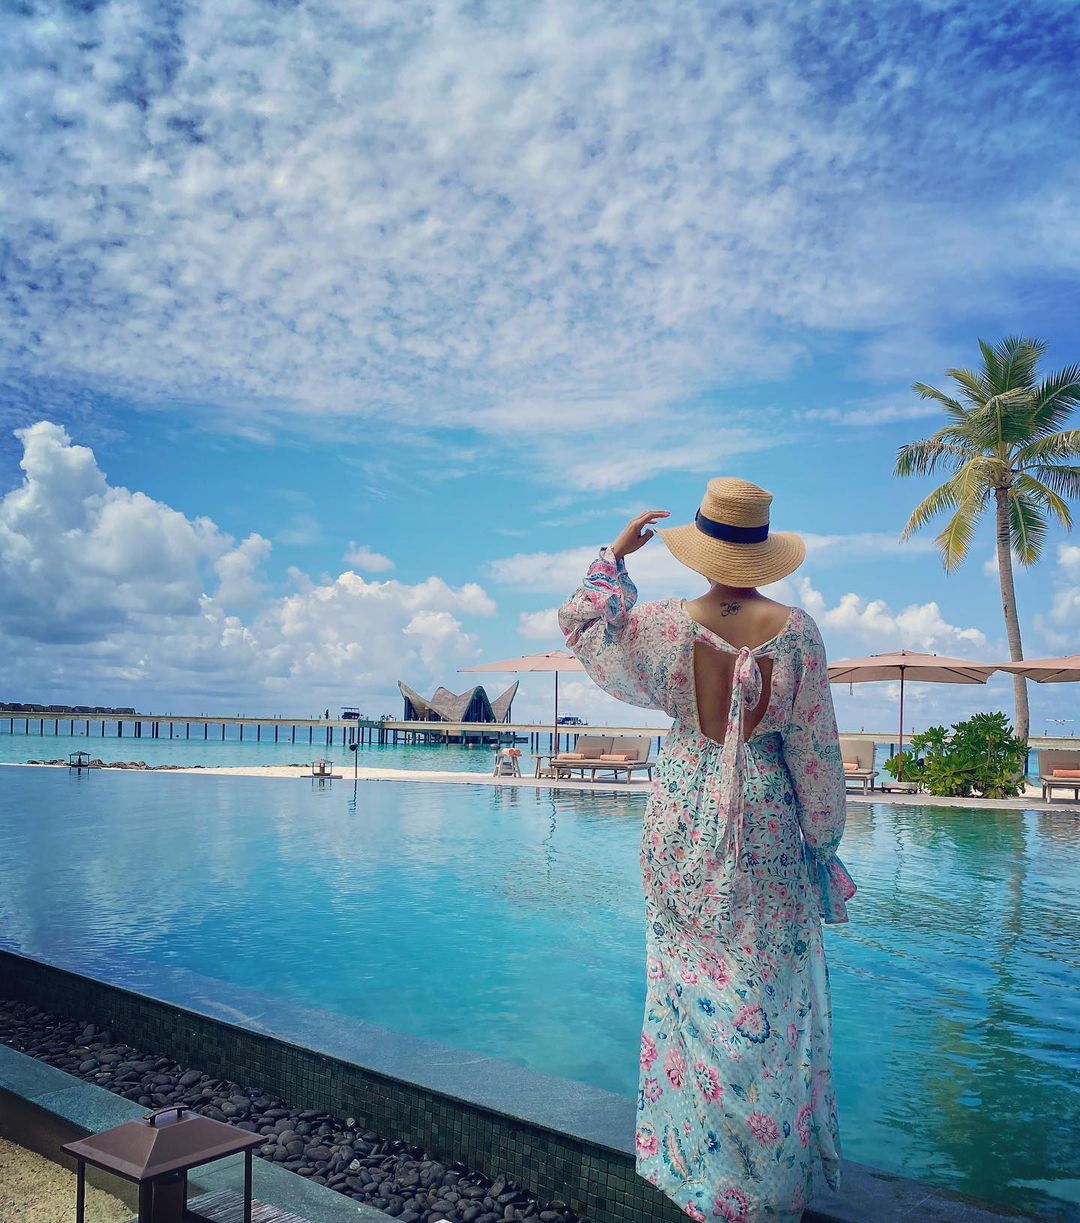 Samantha new look scenic vacation in bali instagram photos become viral